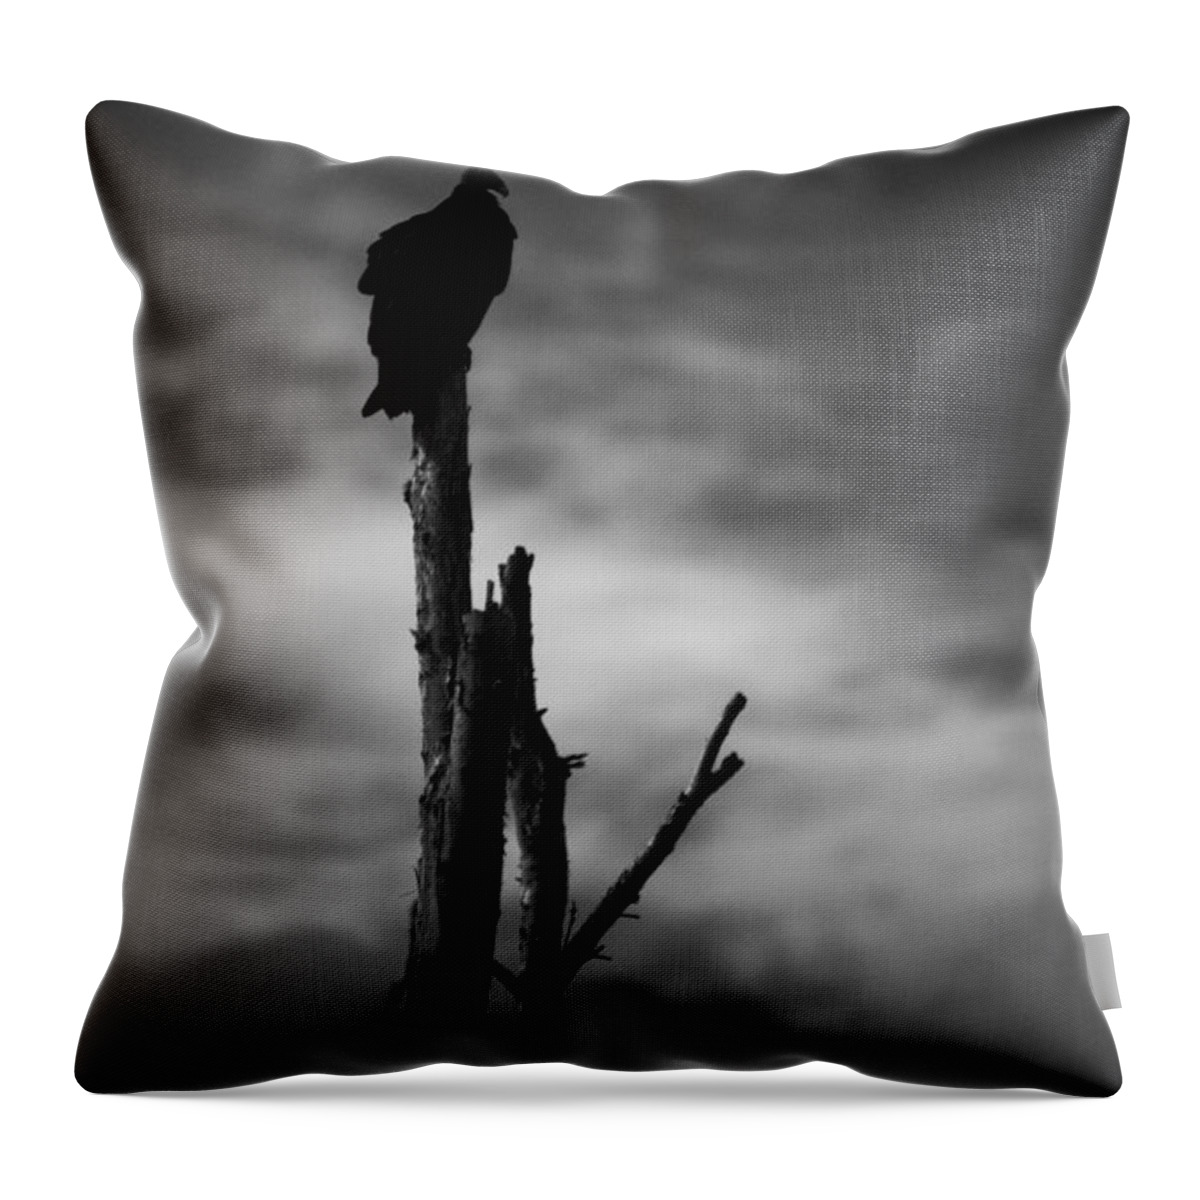 Florida Throw Pillow featuring the photograph Lone Vulture by Bradley R Youngberg